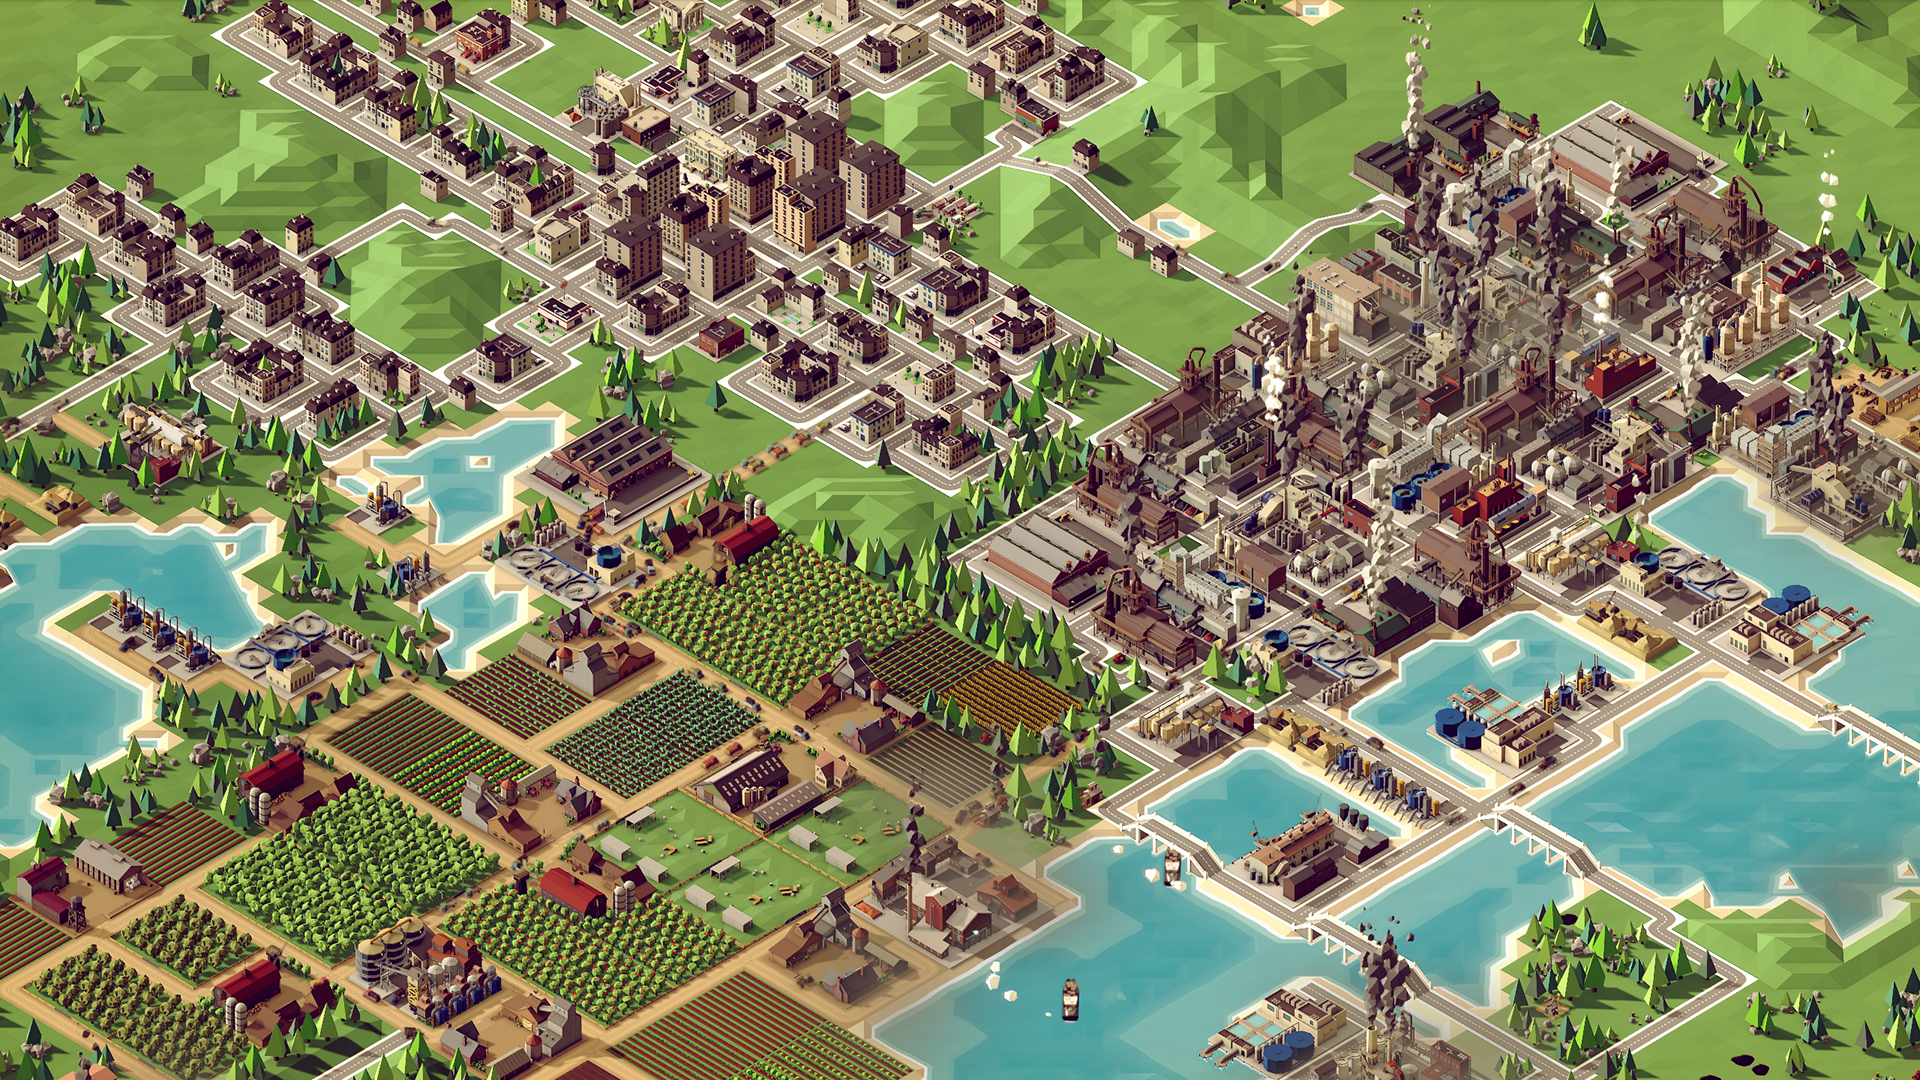 download rise of industry game